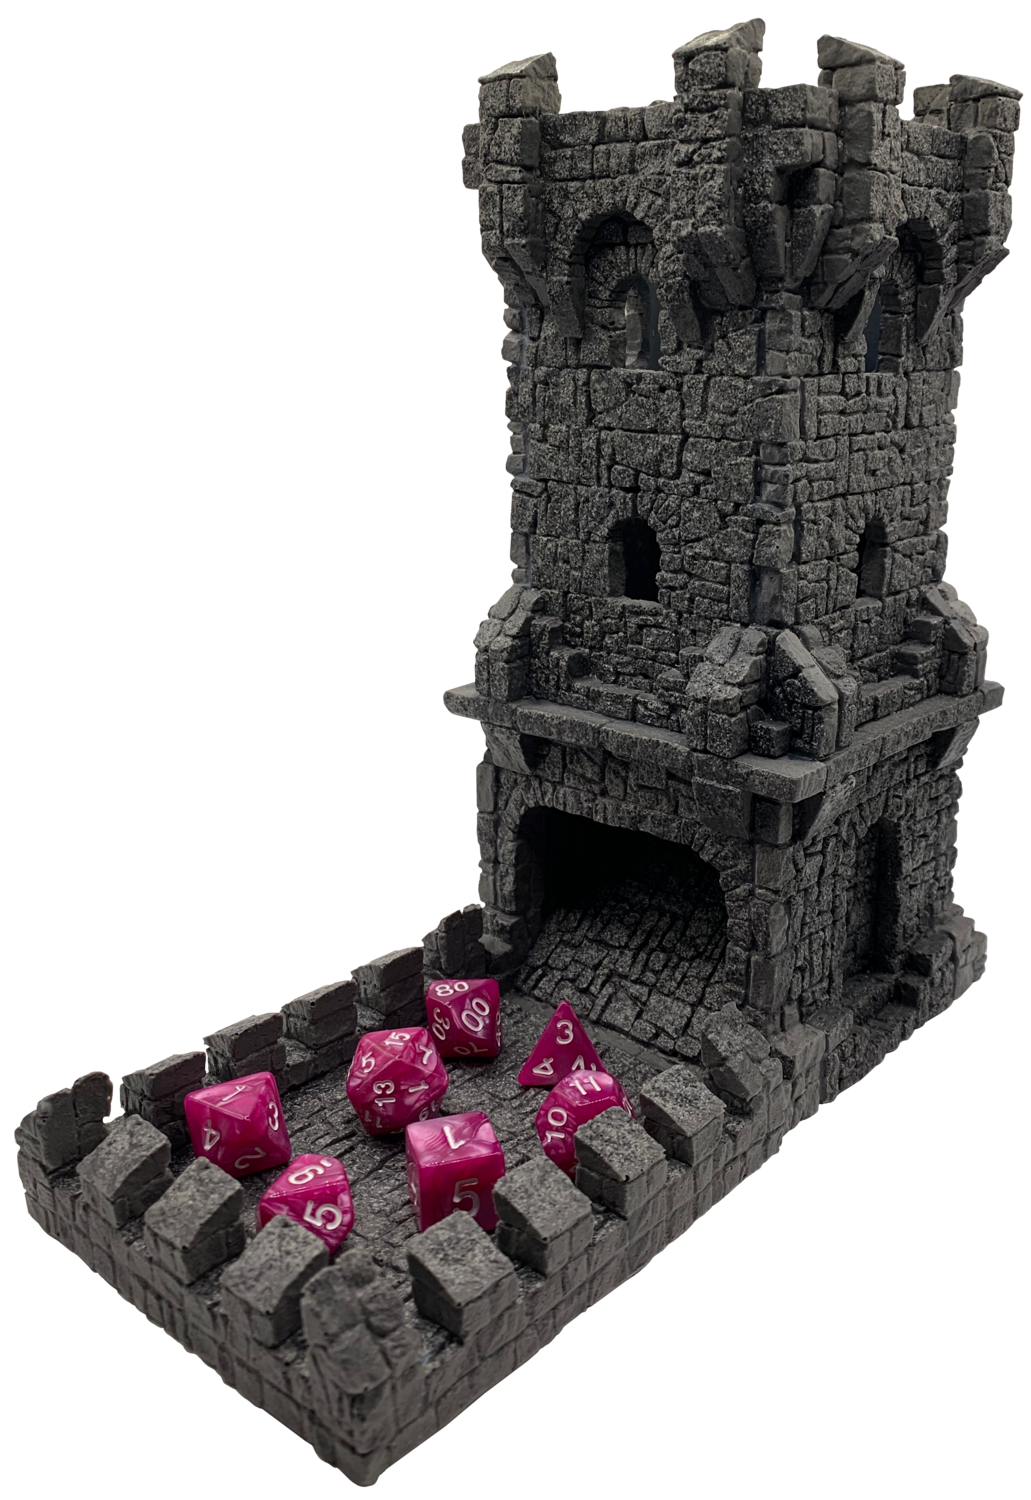 Dice Tower of Fortune